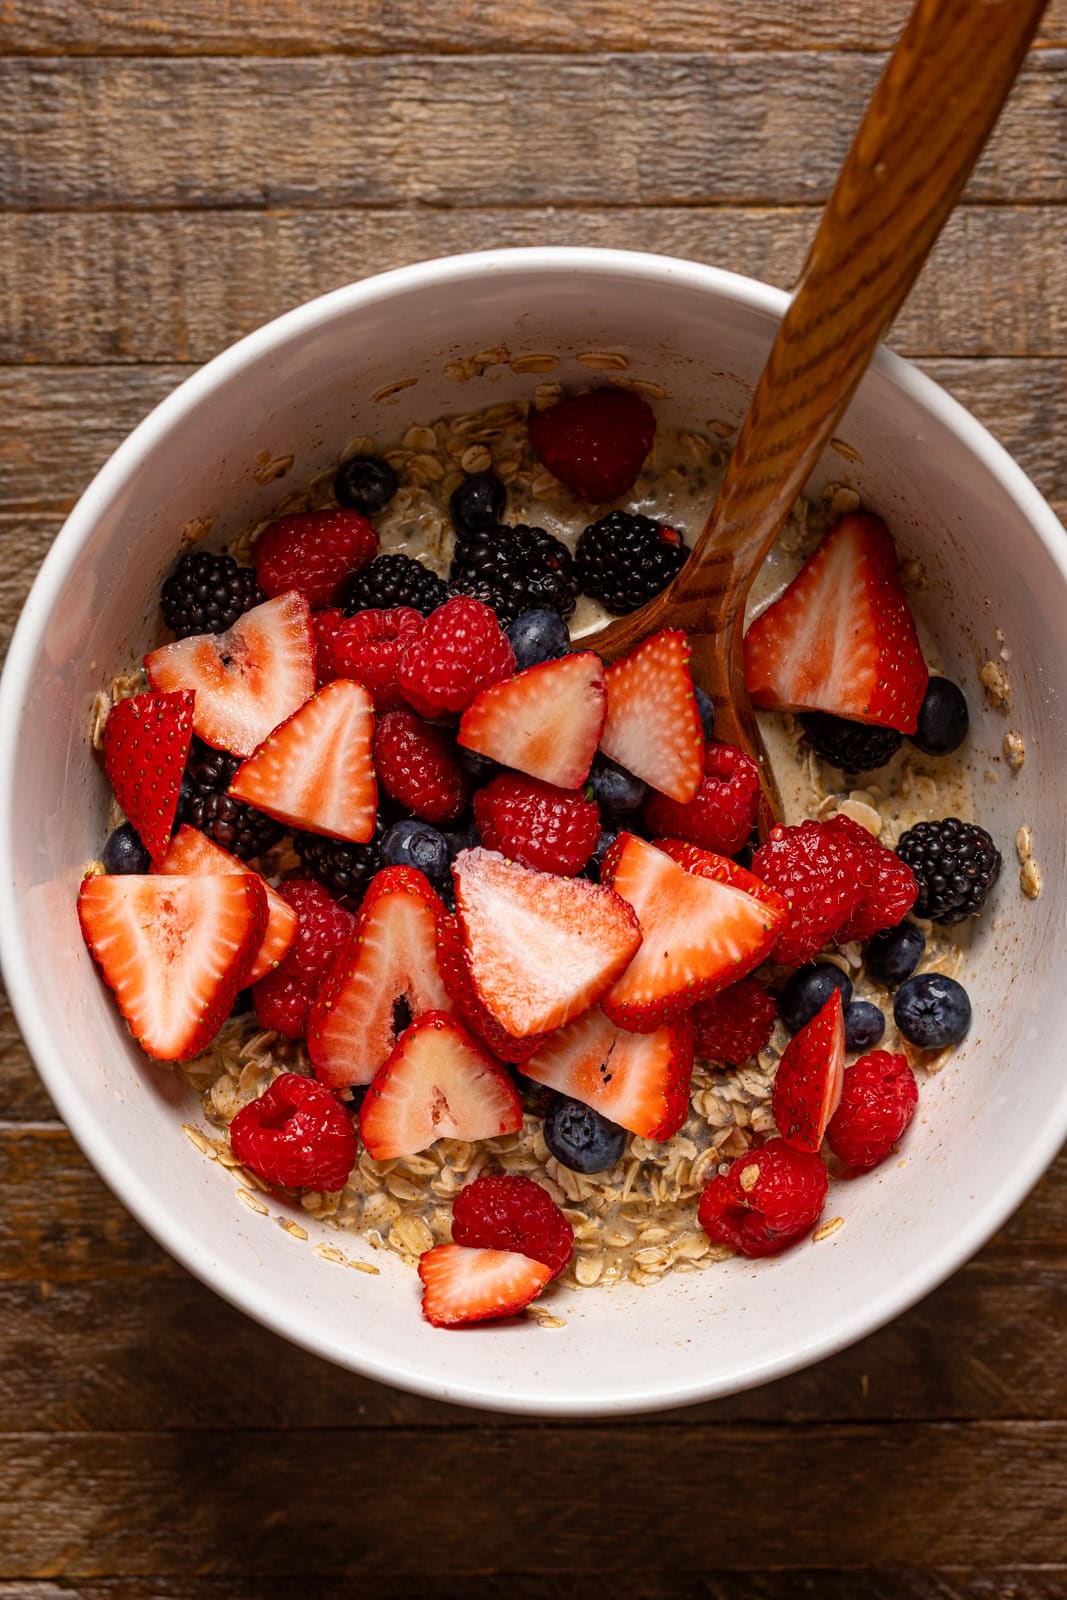 Fresh berries and ingredients in a white bowl with a wooden spoon.